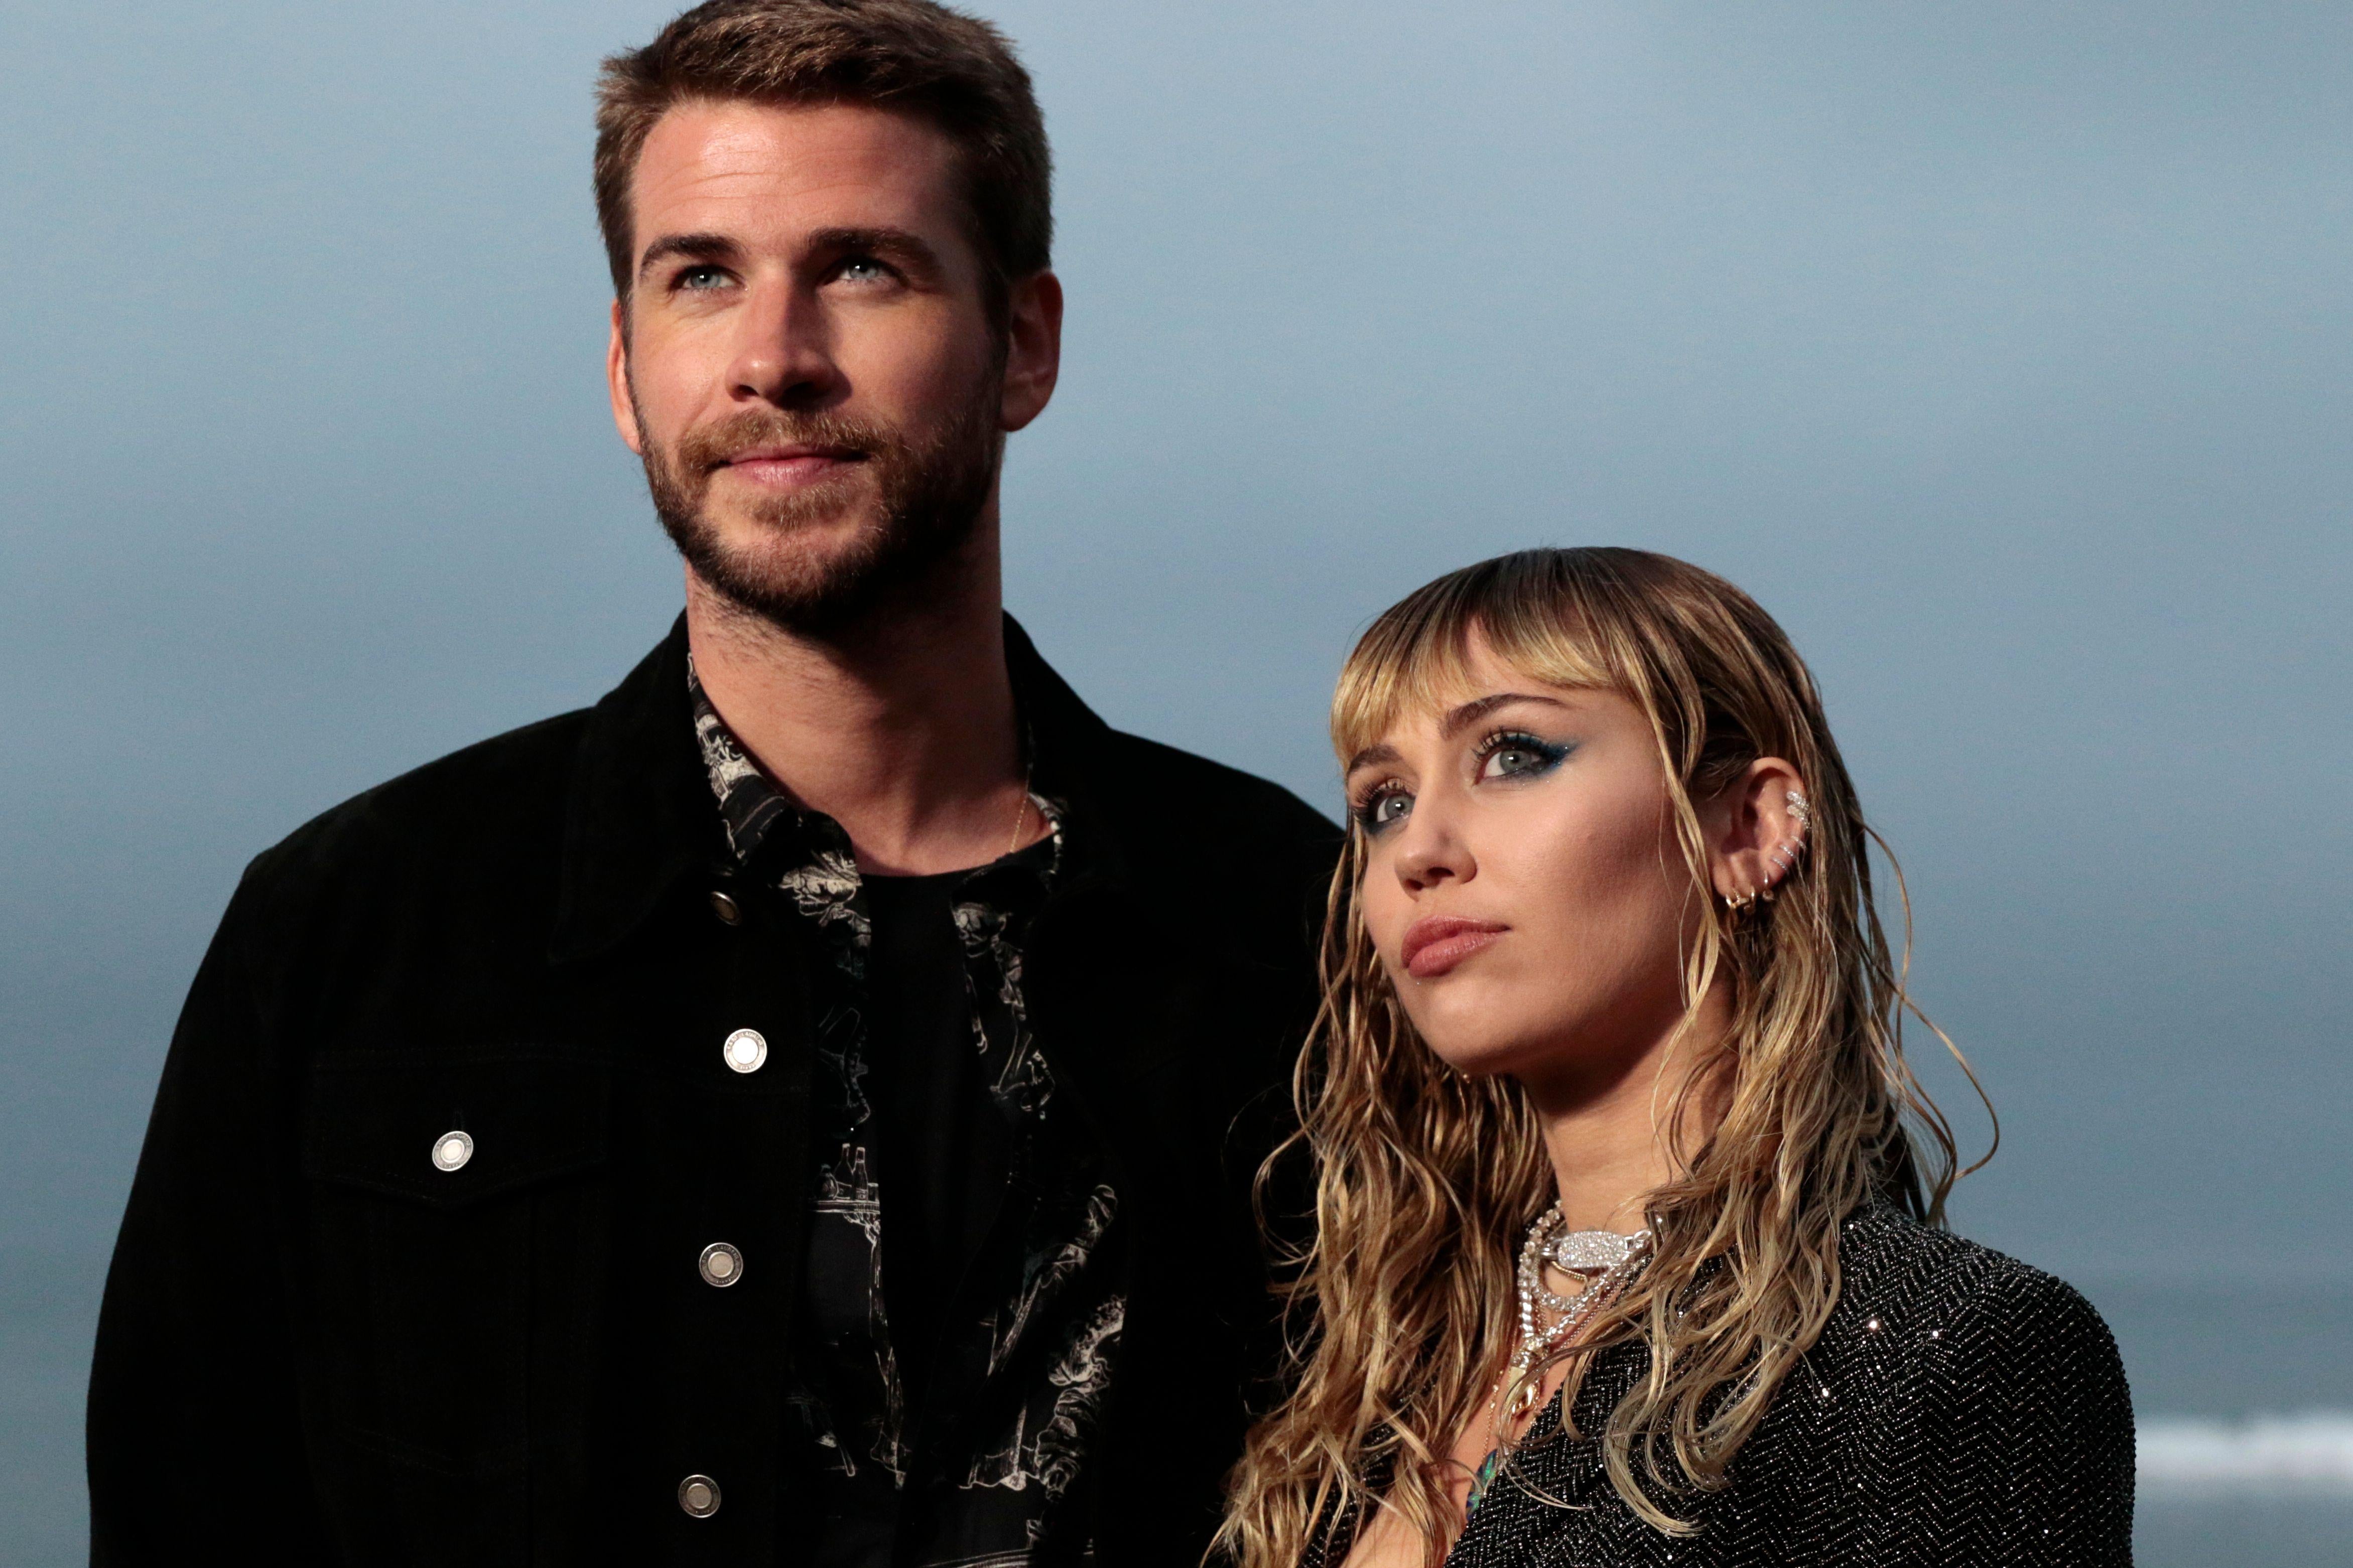 Liam Hemsworth and Miley Cyrus looking thoughtful, with an ocean in the background.